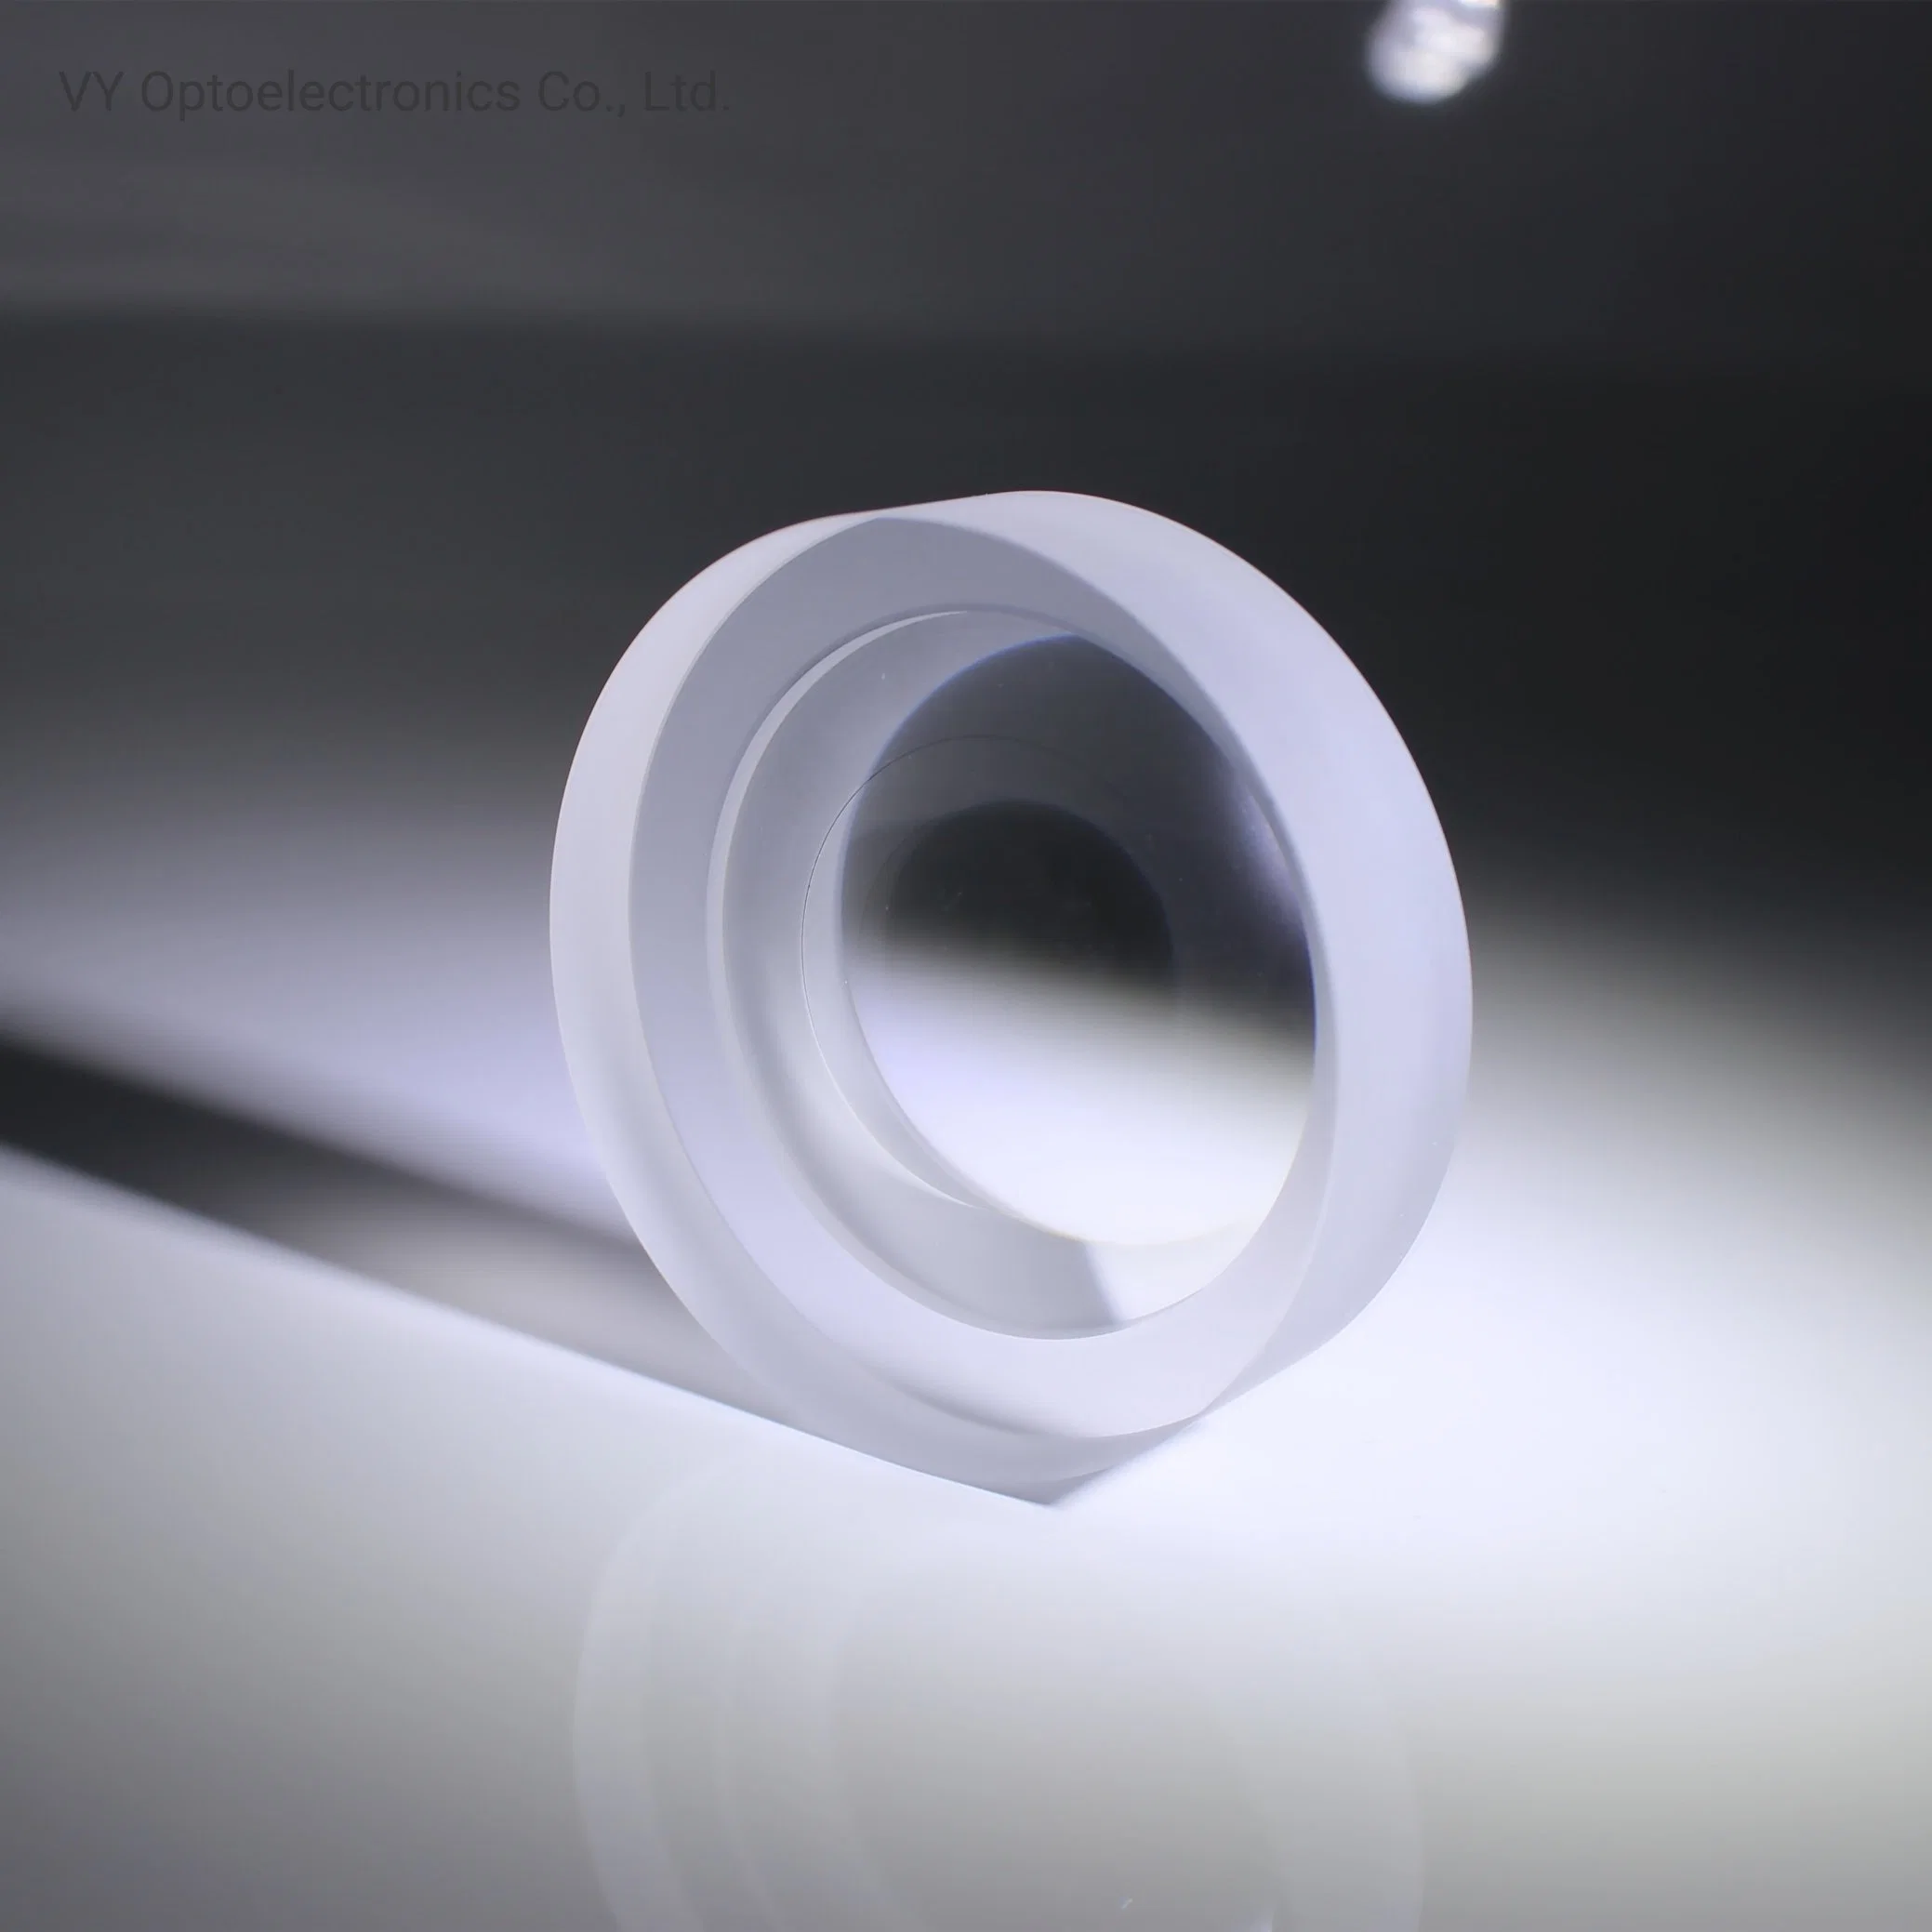 High Precision Bk7/Fused Silica/Sapphire Optical Plano Concave Lens with Ar Coating